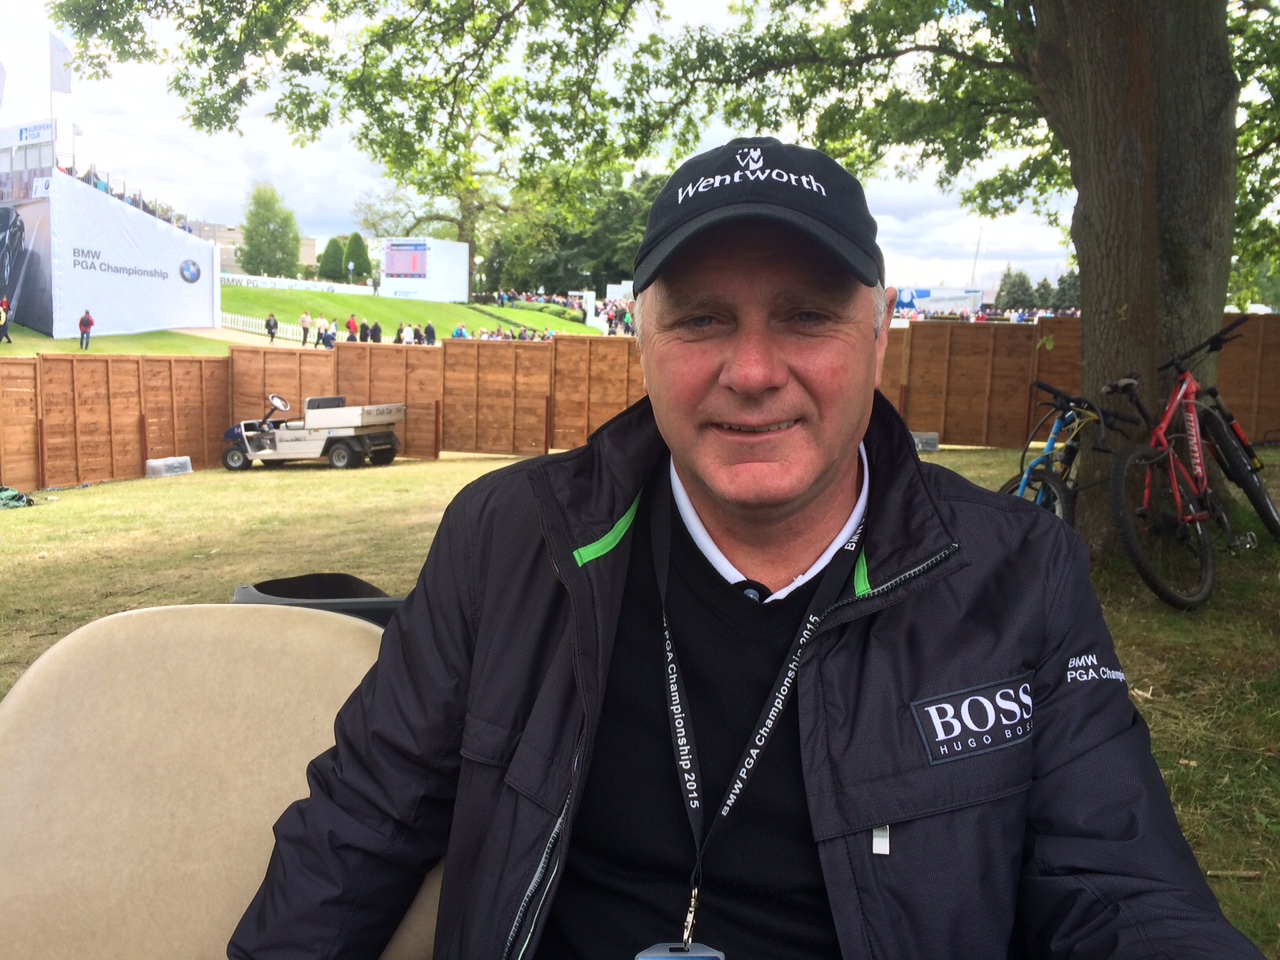 Scotland's Kenny Mackay, 51, is in charge of his third BMW PGA Championship at Wentworth 